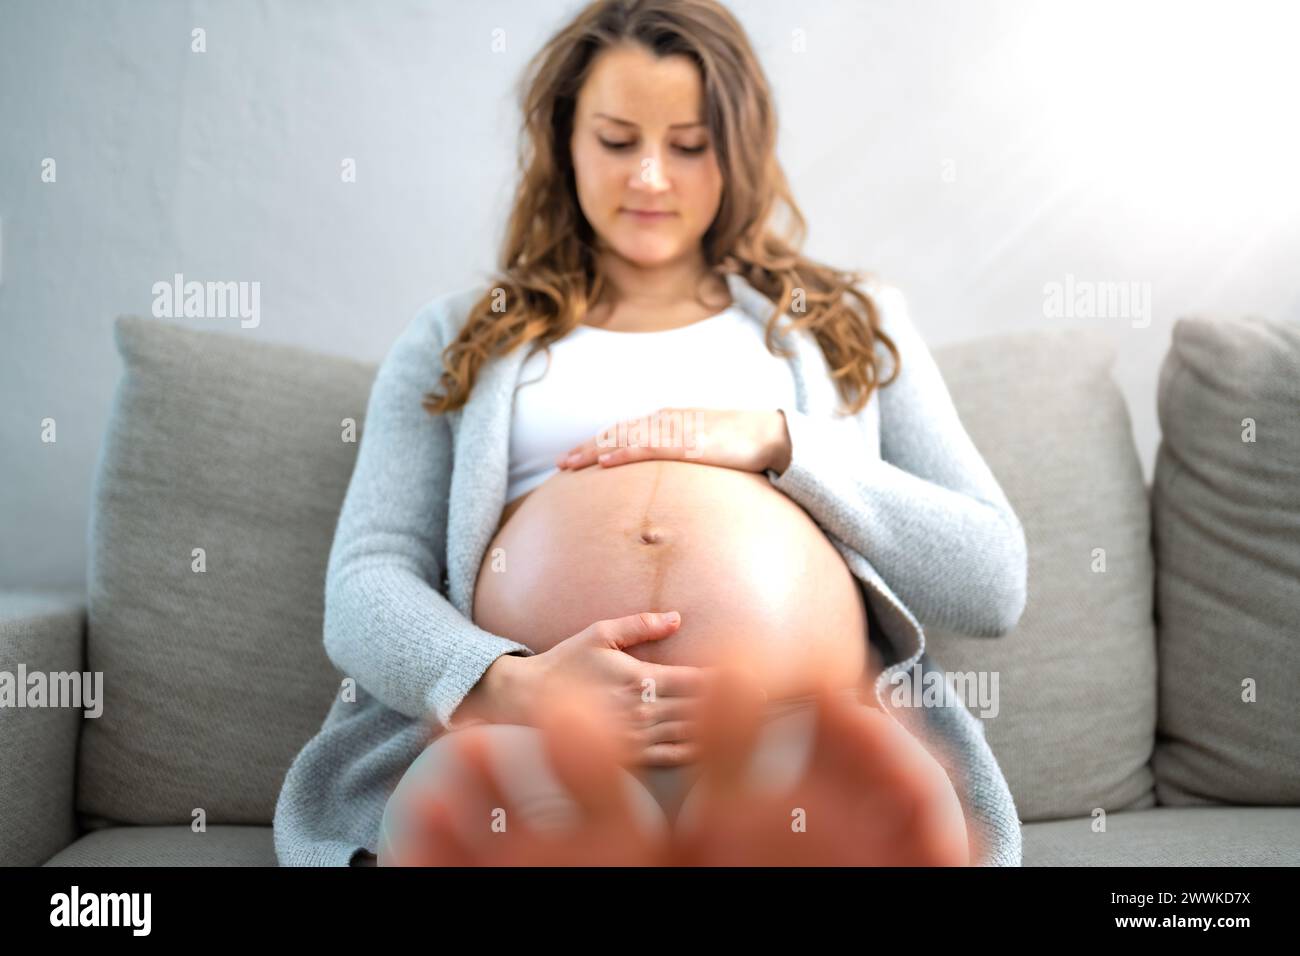 Description: Frontal view of happy woman sitting on sofa gently holding her belly in expectation of having a baby in last stage of pregnancy. Pregnanc Stock Photo